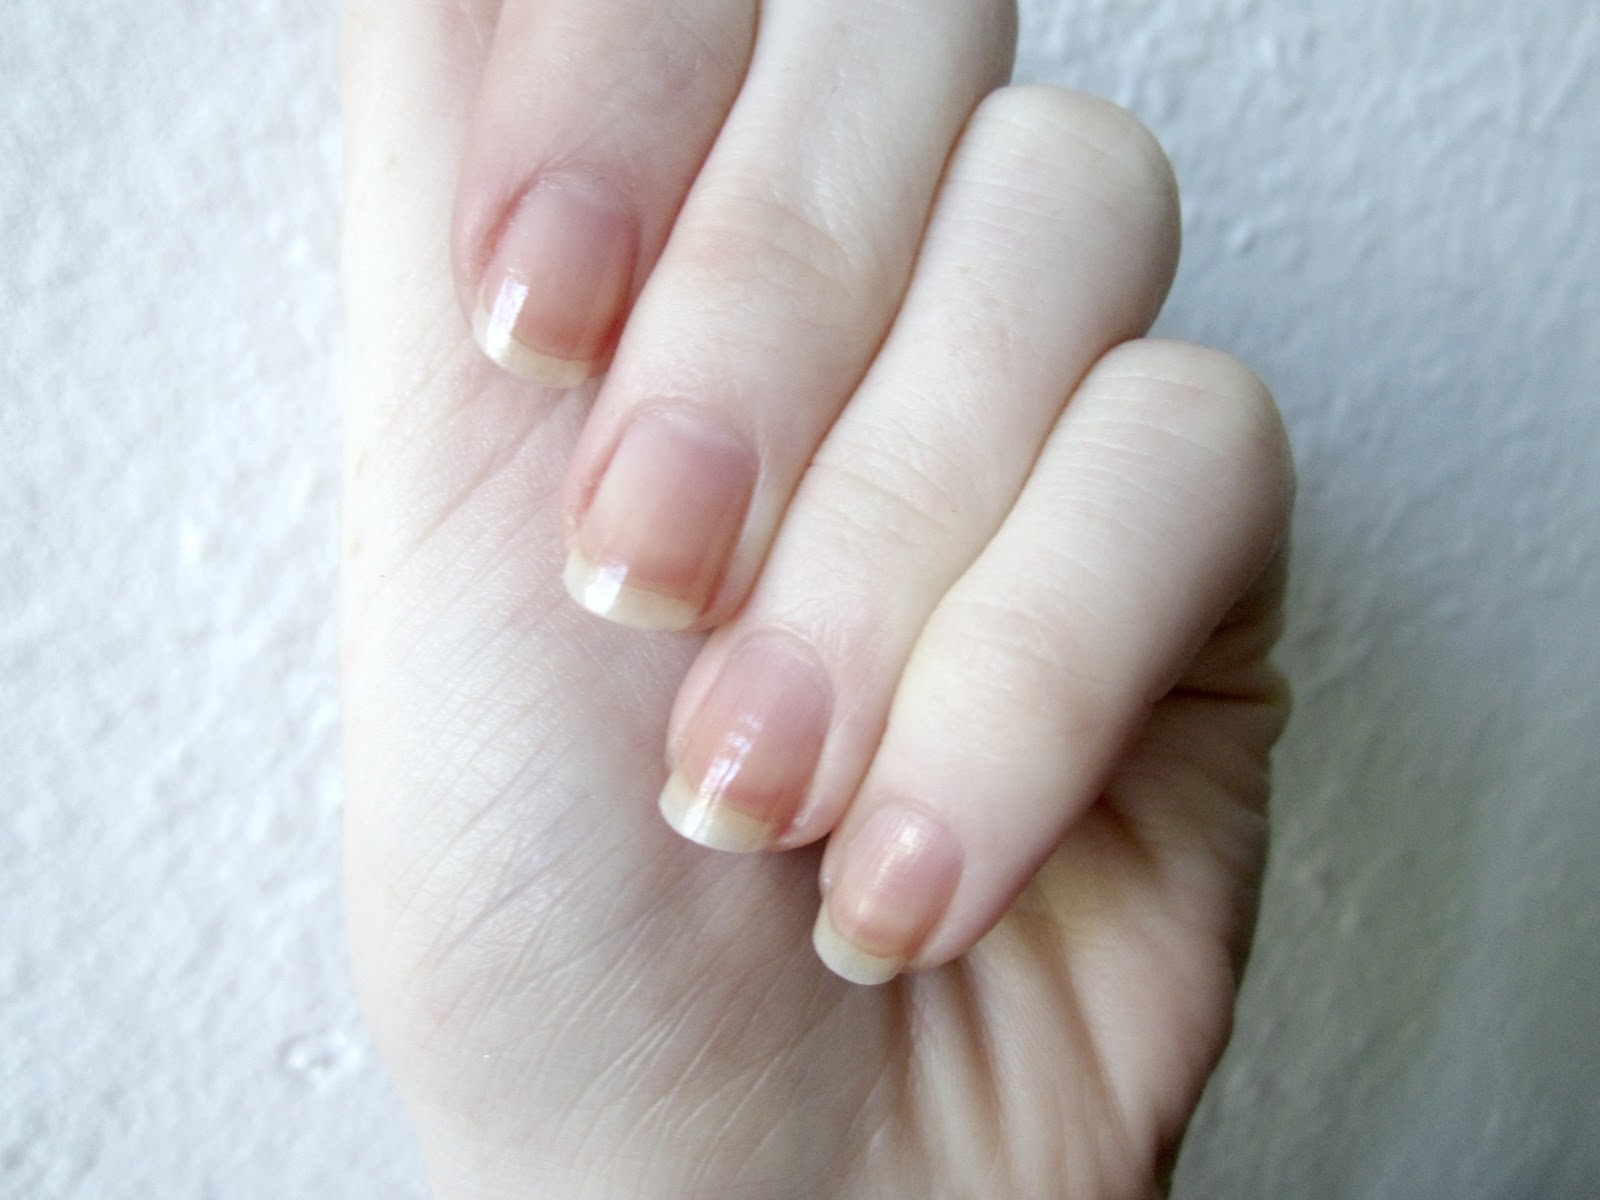 Long Nails: 10 Tips for Growing Strong, Healthy Nails - wide 9